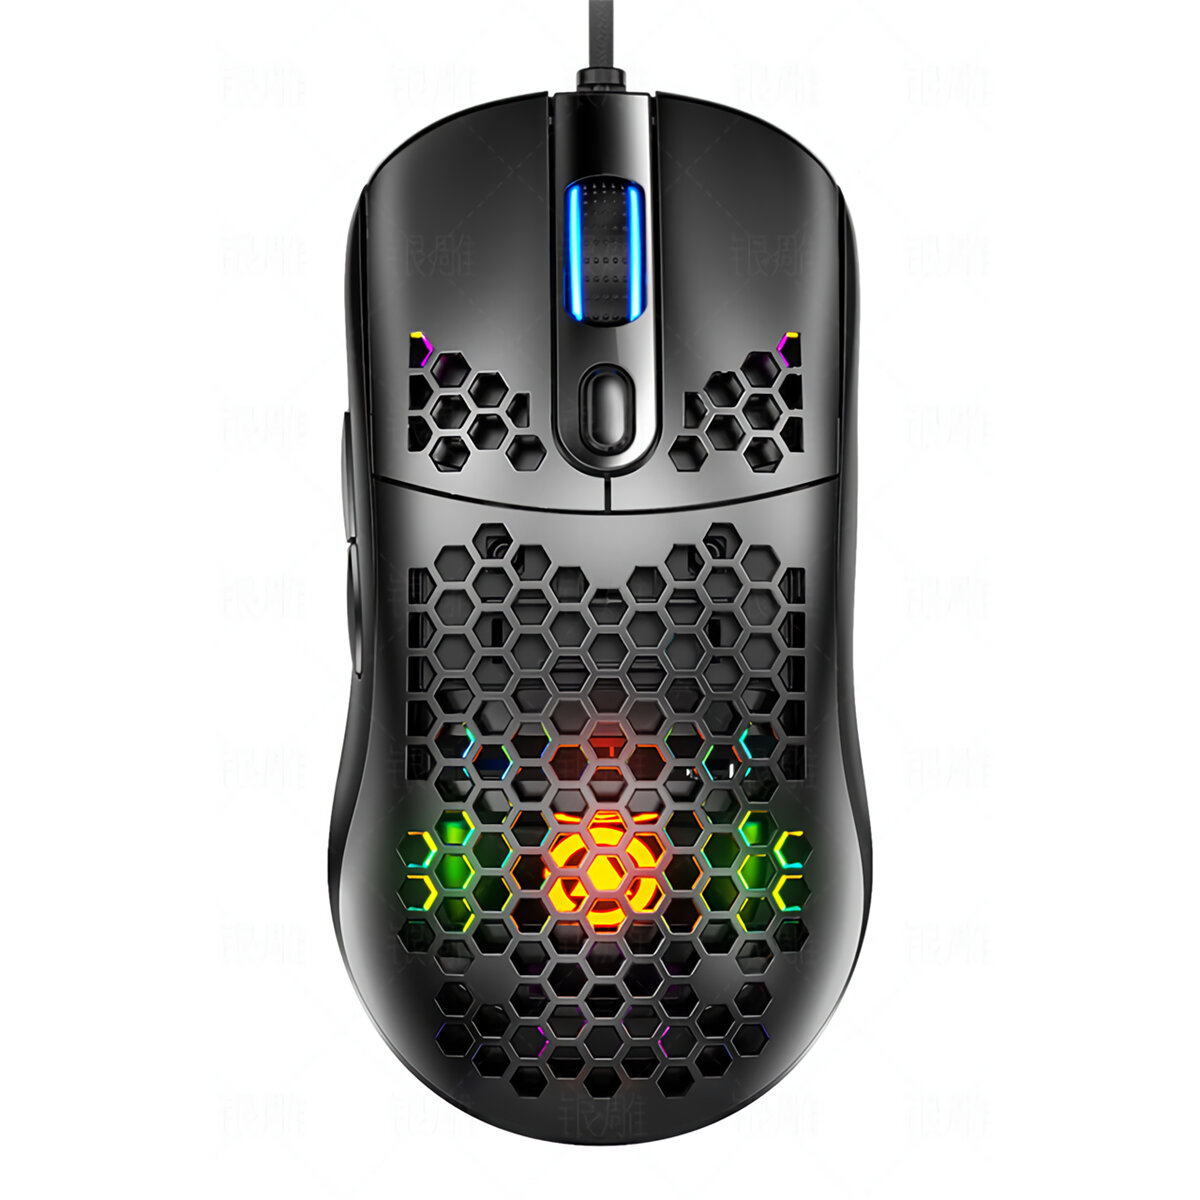 

YINDIAO G7 Wired Gaming Mouse 7200DPI RGB Backlight Computer Mouse Honeycomb Hollow Mice for Computer Laptop PC Gamer